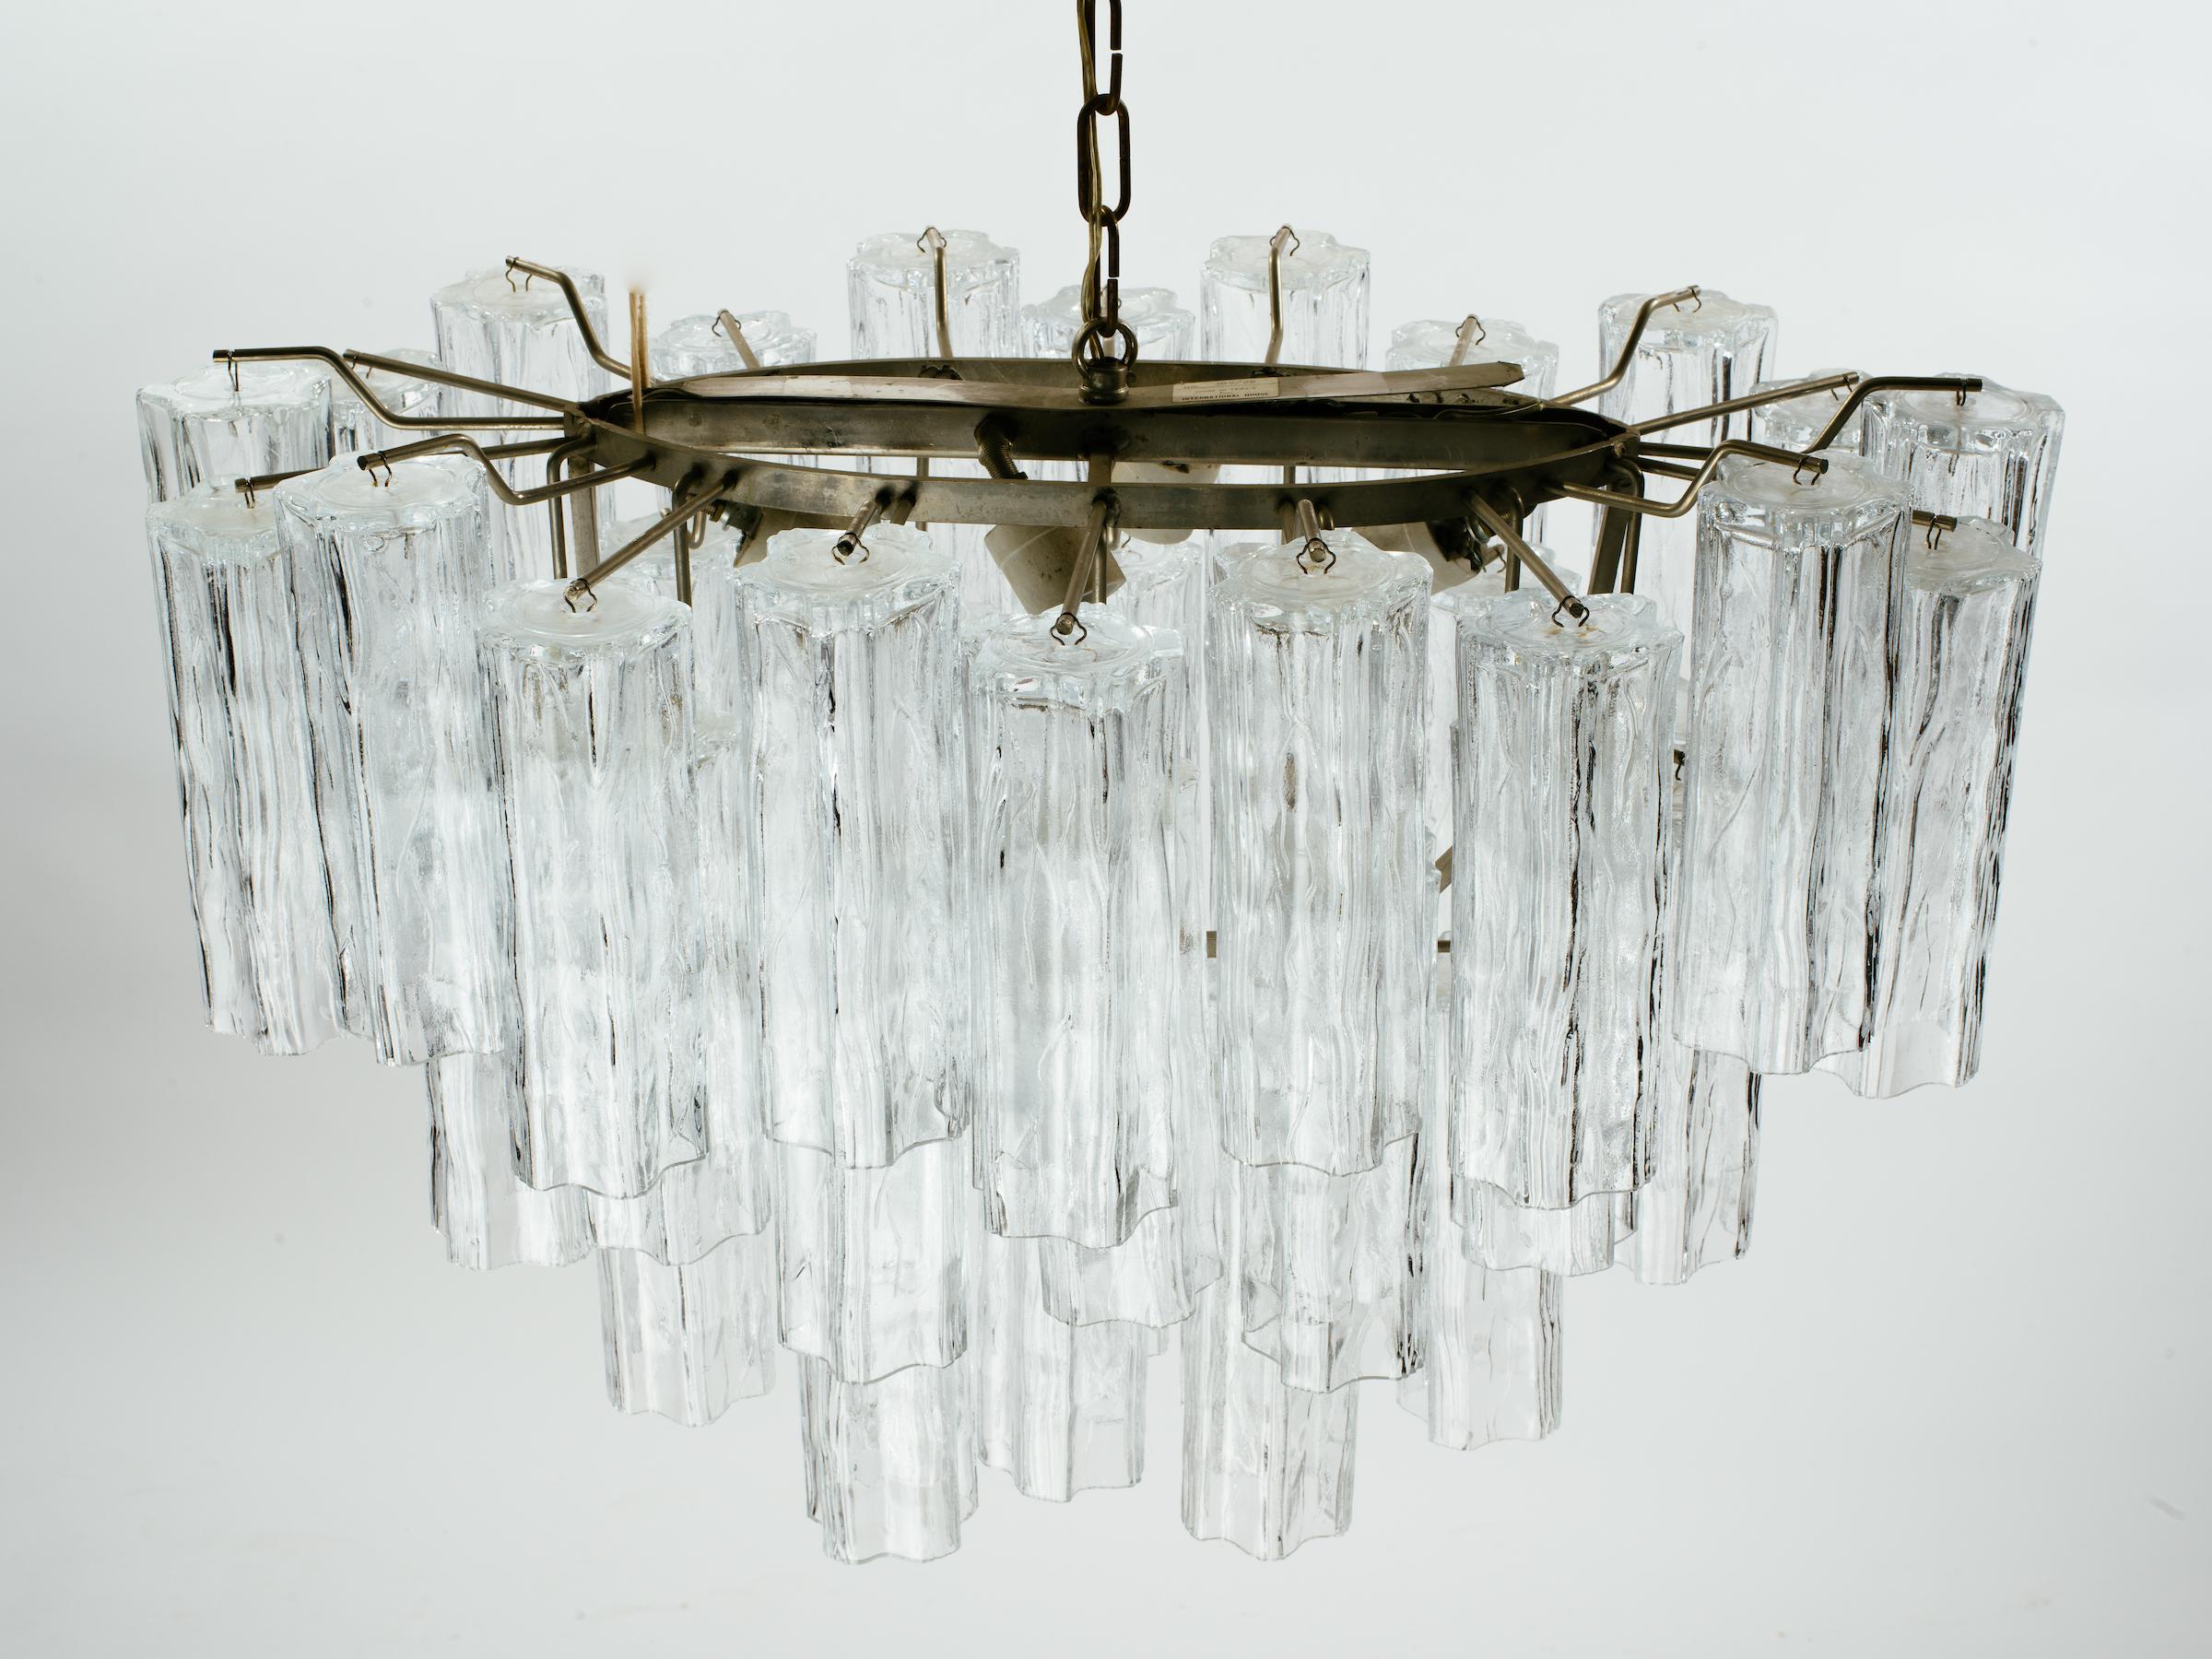 Molded Oval 1970s Italian Glass Tube Tiered Chandelier